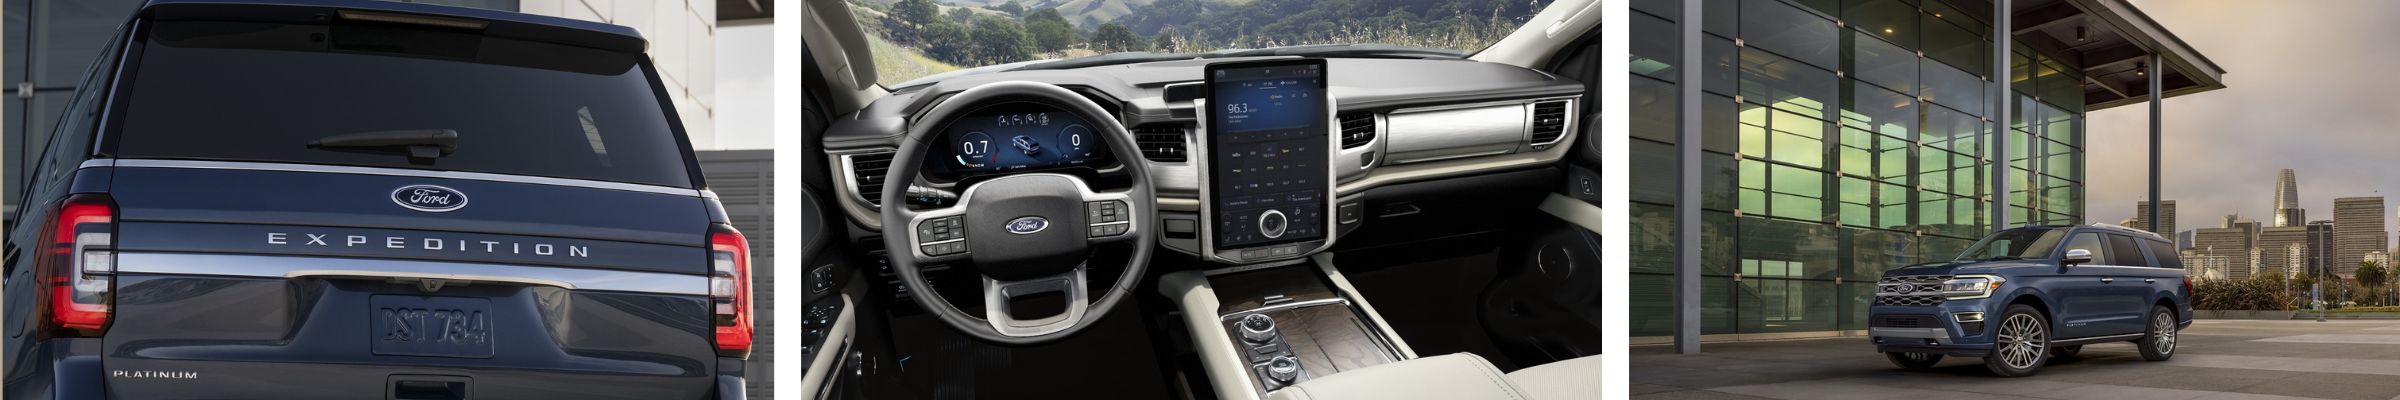 2022 Ford Expedition For Sale near Columbia MD